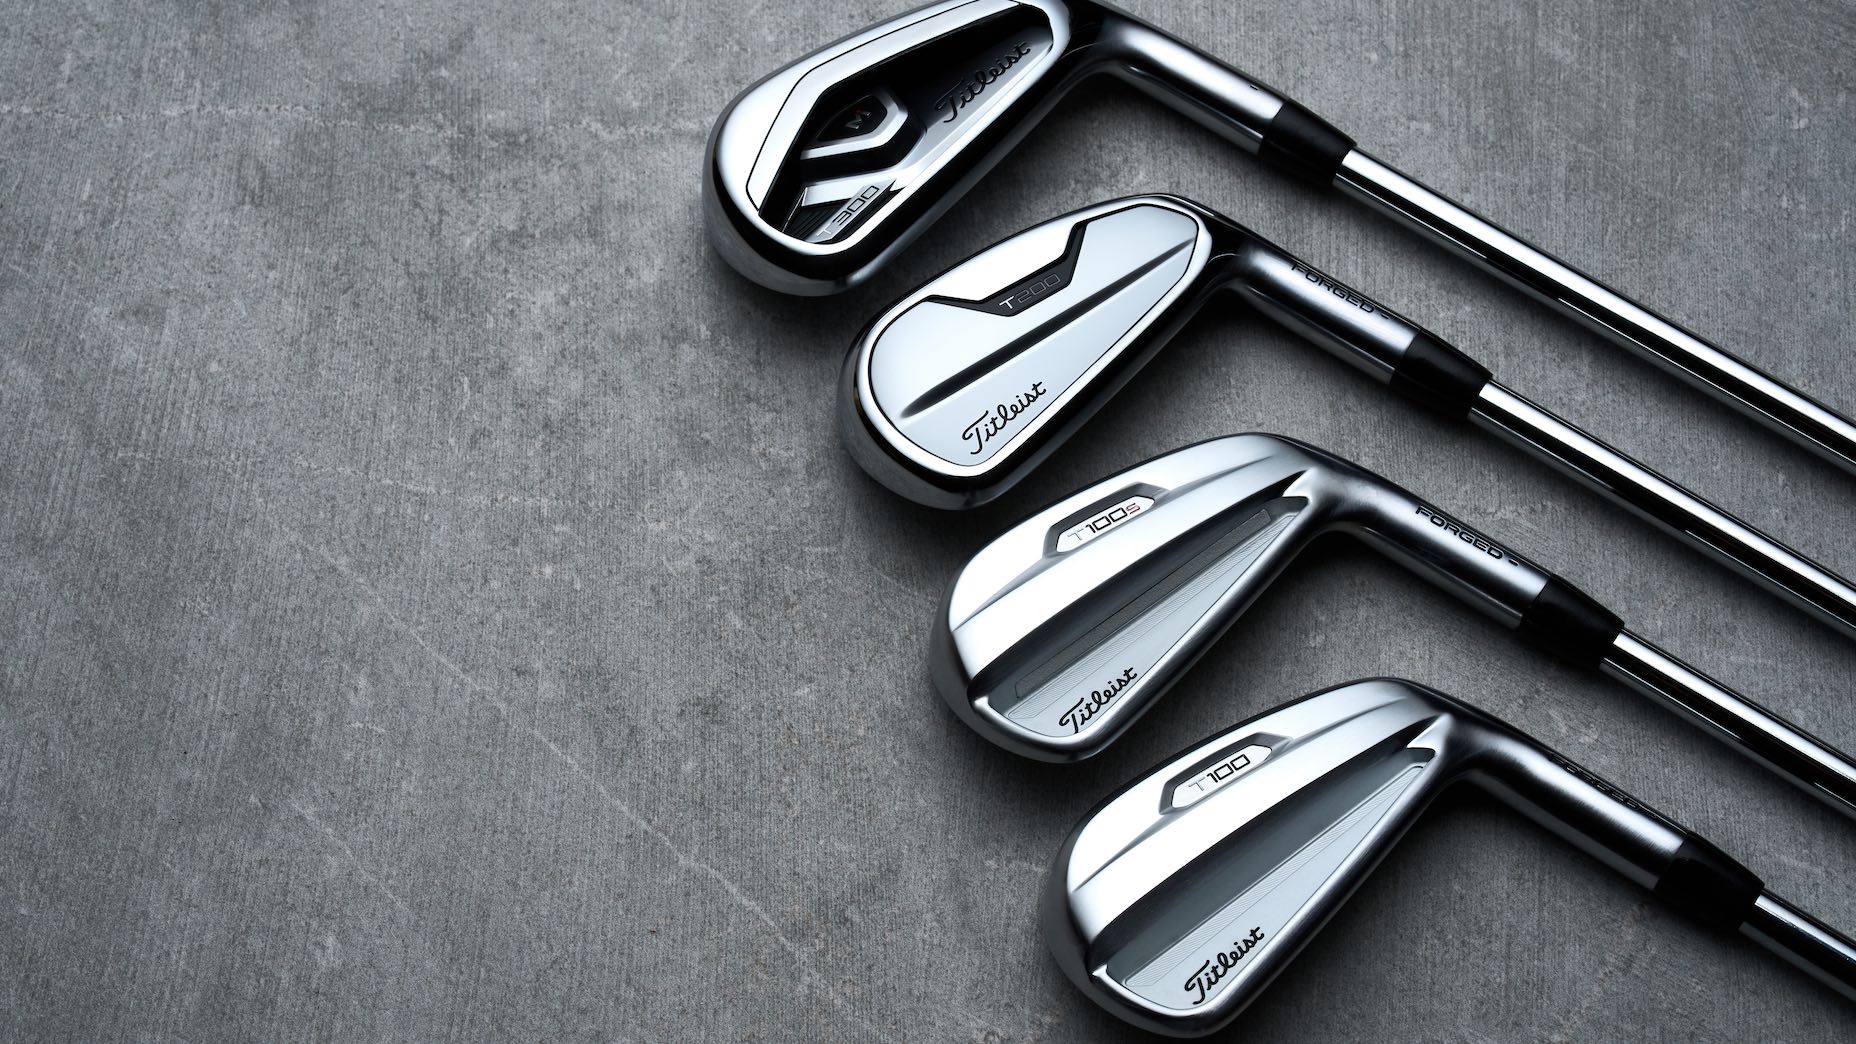 Titleist's new T100, T100S, T200 and T300 irons: First Look